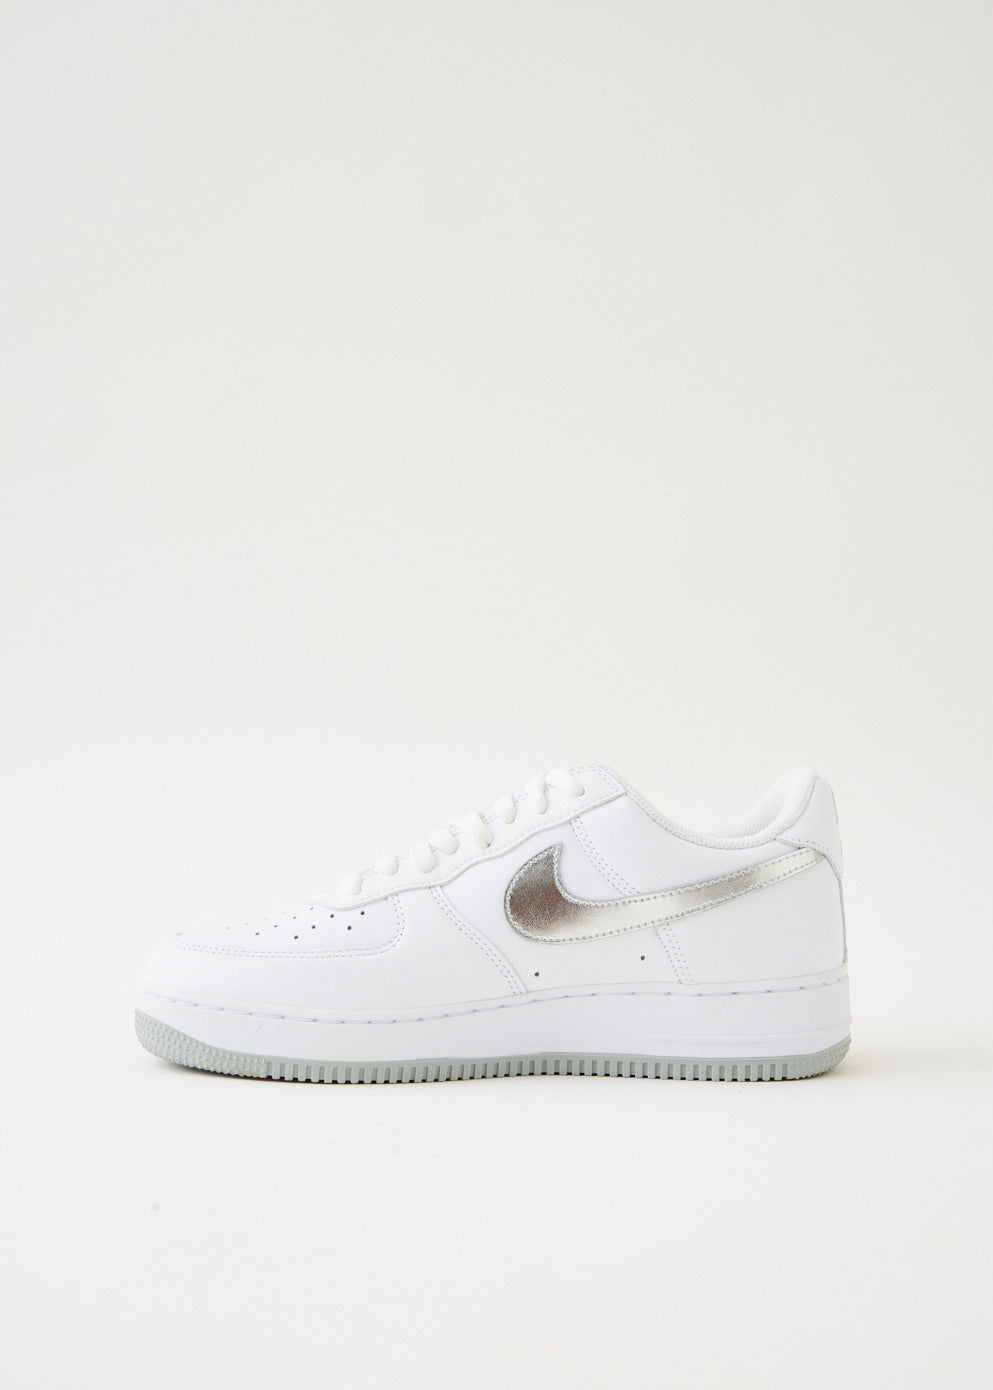 Where to buy Nike Air Force 1 Low “Color of the Month” University